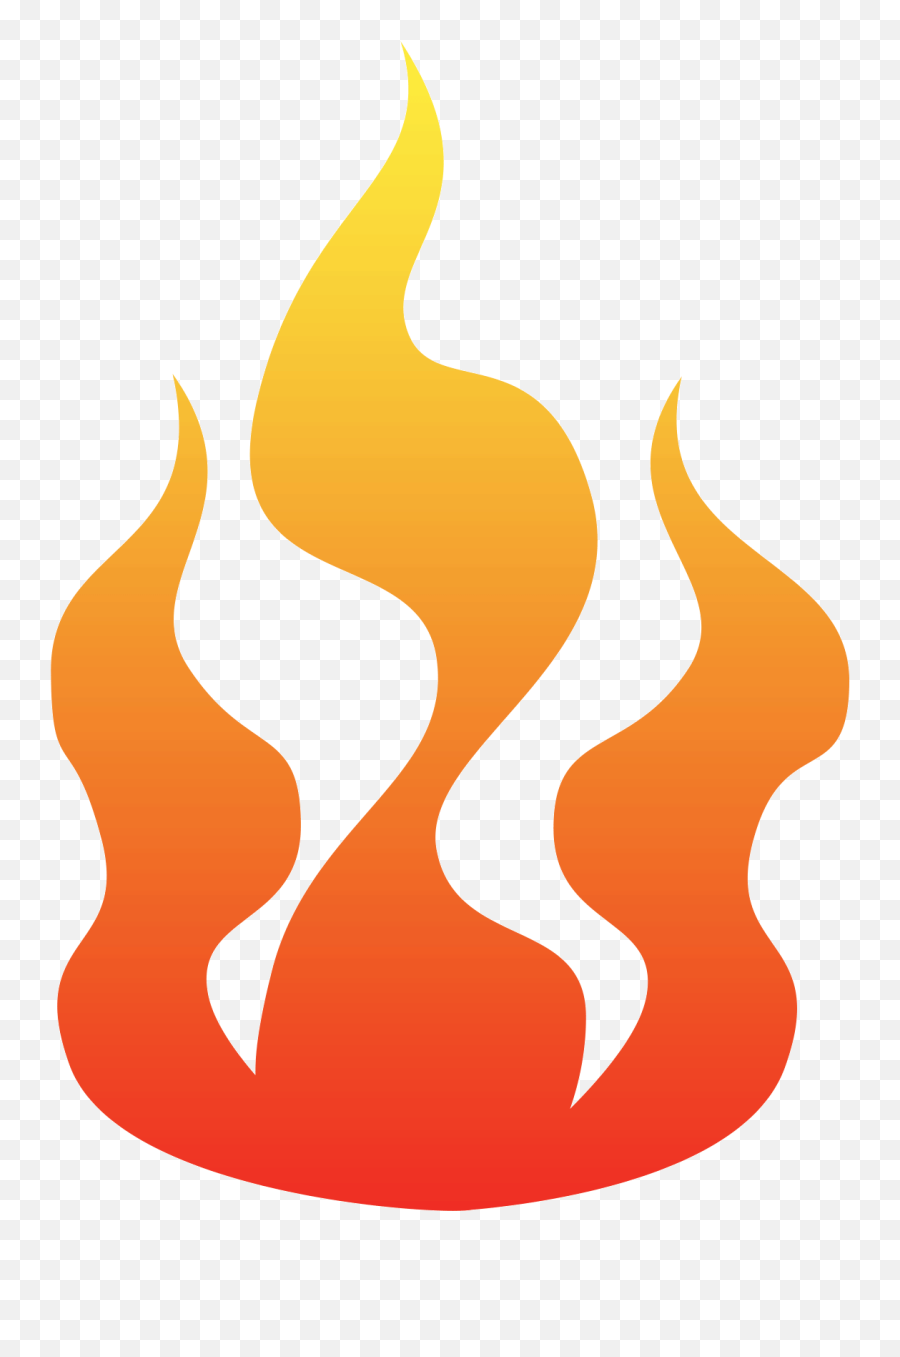 Fire Png Images - Download Fire Png Vector Clipartfire Icon Transparent Background Fire Icon,Fire Background Png